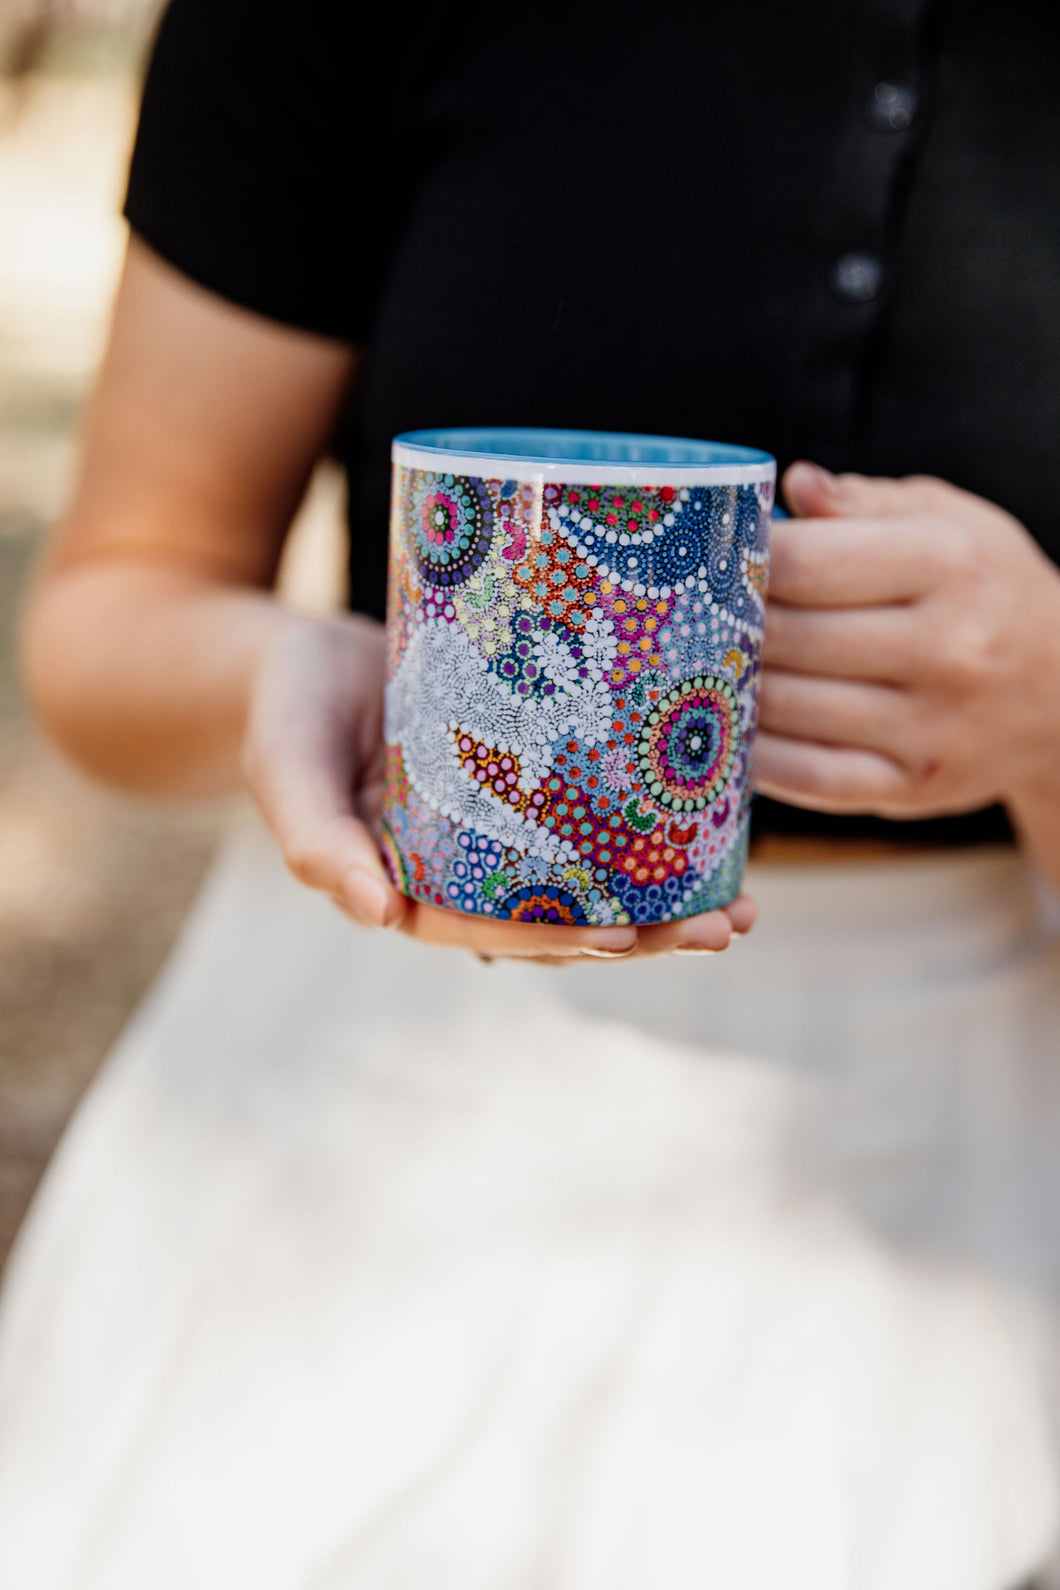 These Wiradjuri Art standard sized coffee mugs come printed with the Kangaroo Dreaming 2 artwork. The mug can be purchased in the colour options of blue, pink, yellow or black for the handle and inside. Indigenous Art Aboriginal Art First Nations Art